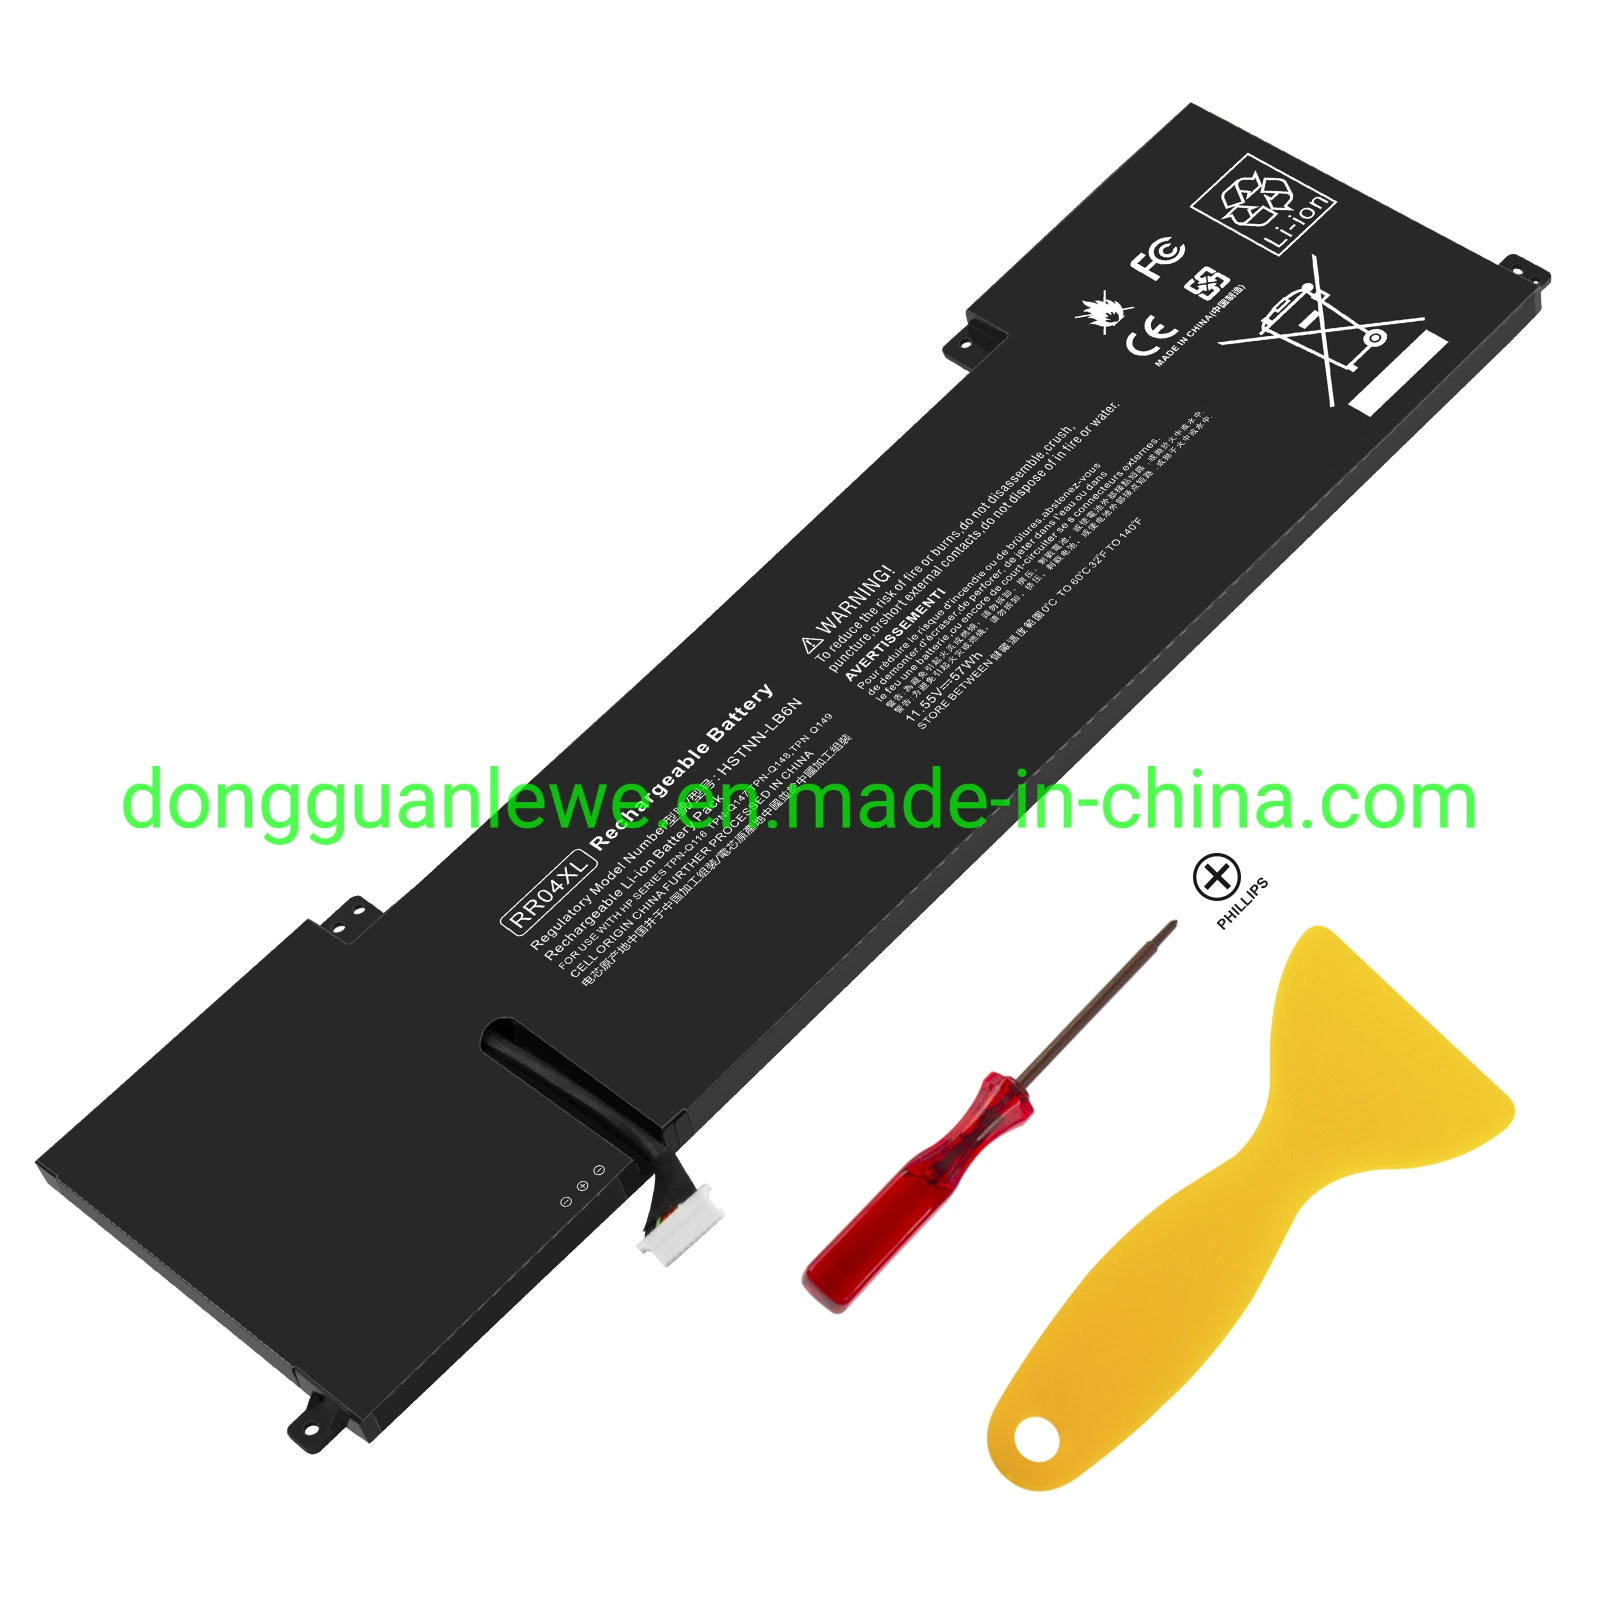 Rr04XL Laptop Battery Replacement for HP Omen 15 Hstnn-Lb6n Tpn-W111 778951-421 15.2V 58wh Lithium Battery